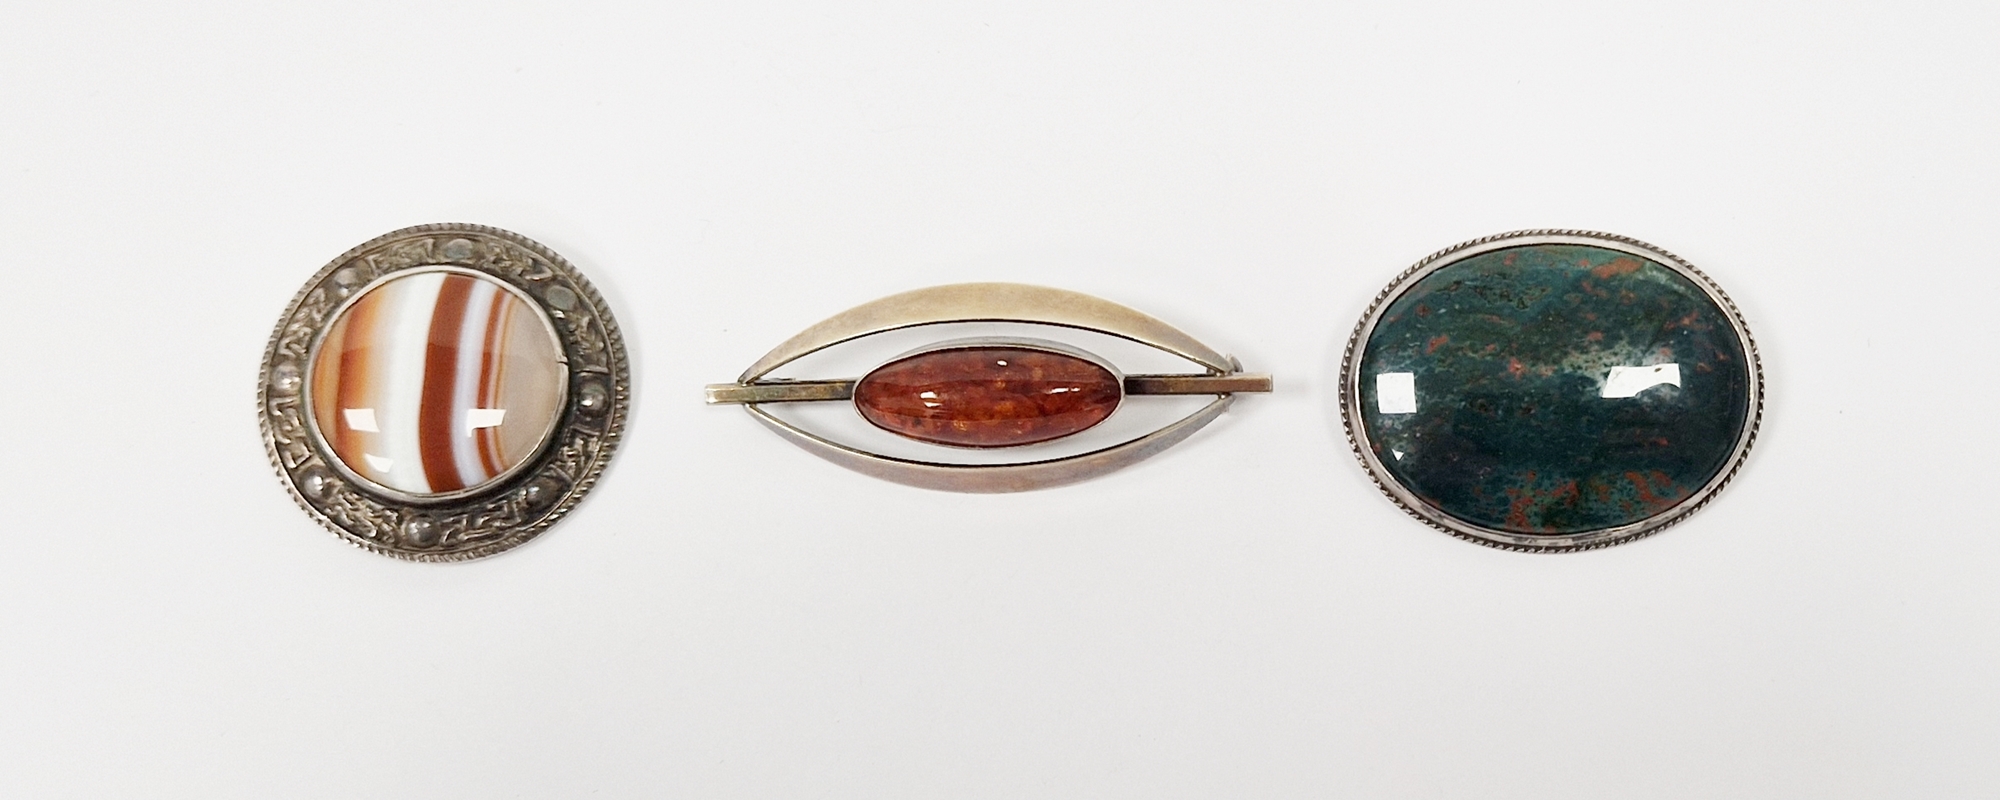 Victorian silver and bloodstone brooch set large oval polished stone, a Scottish silver and banded